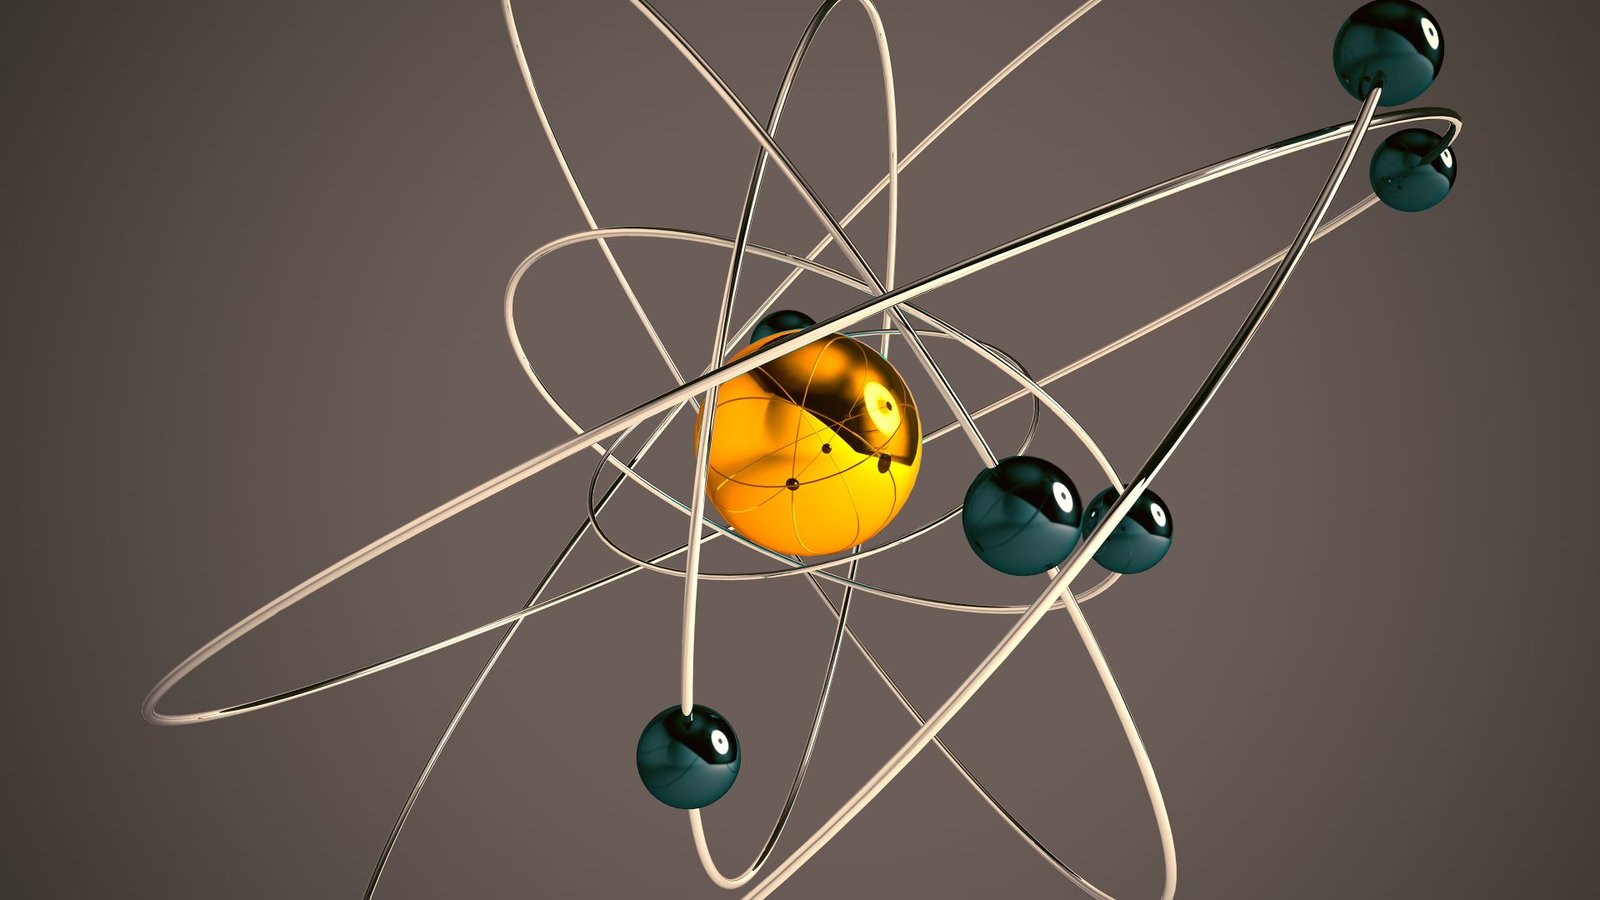 Are Atoms Real?